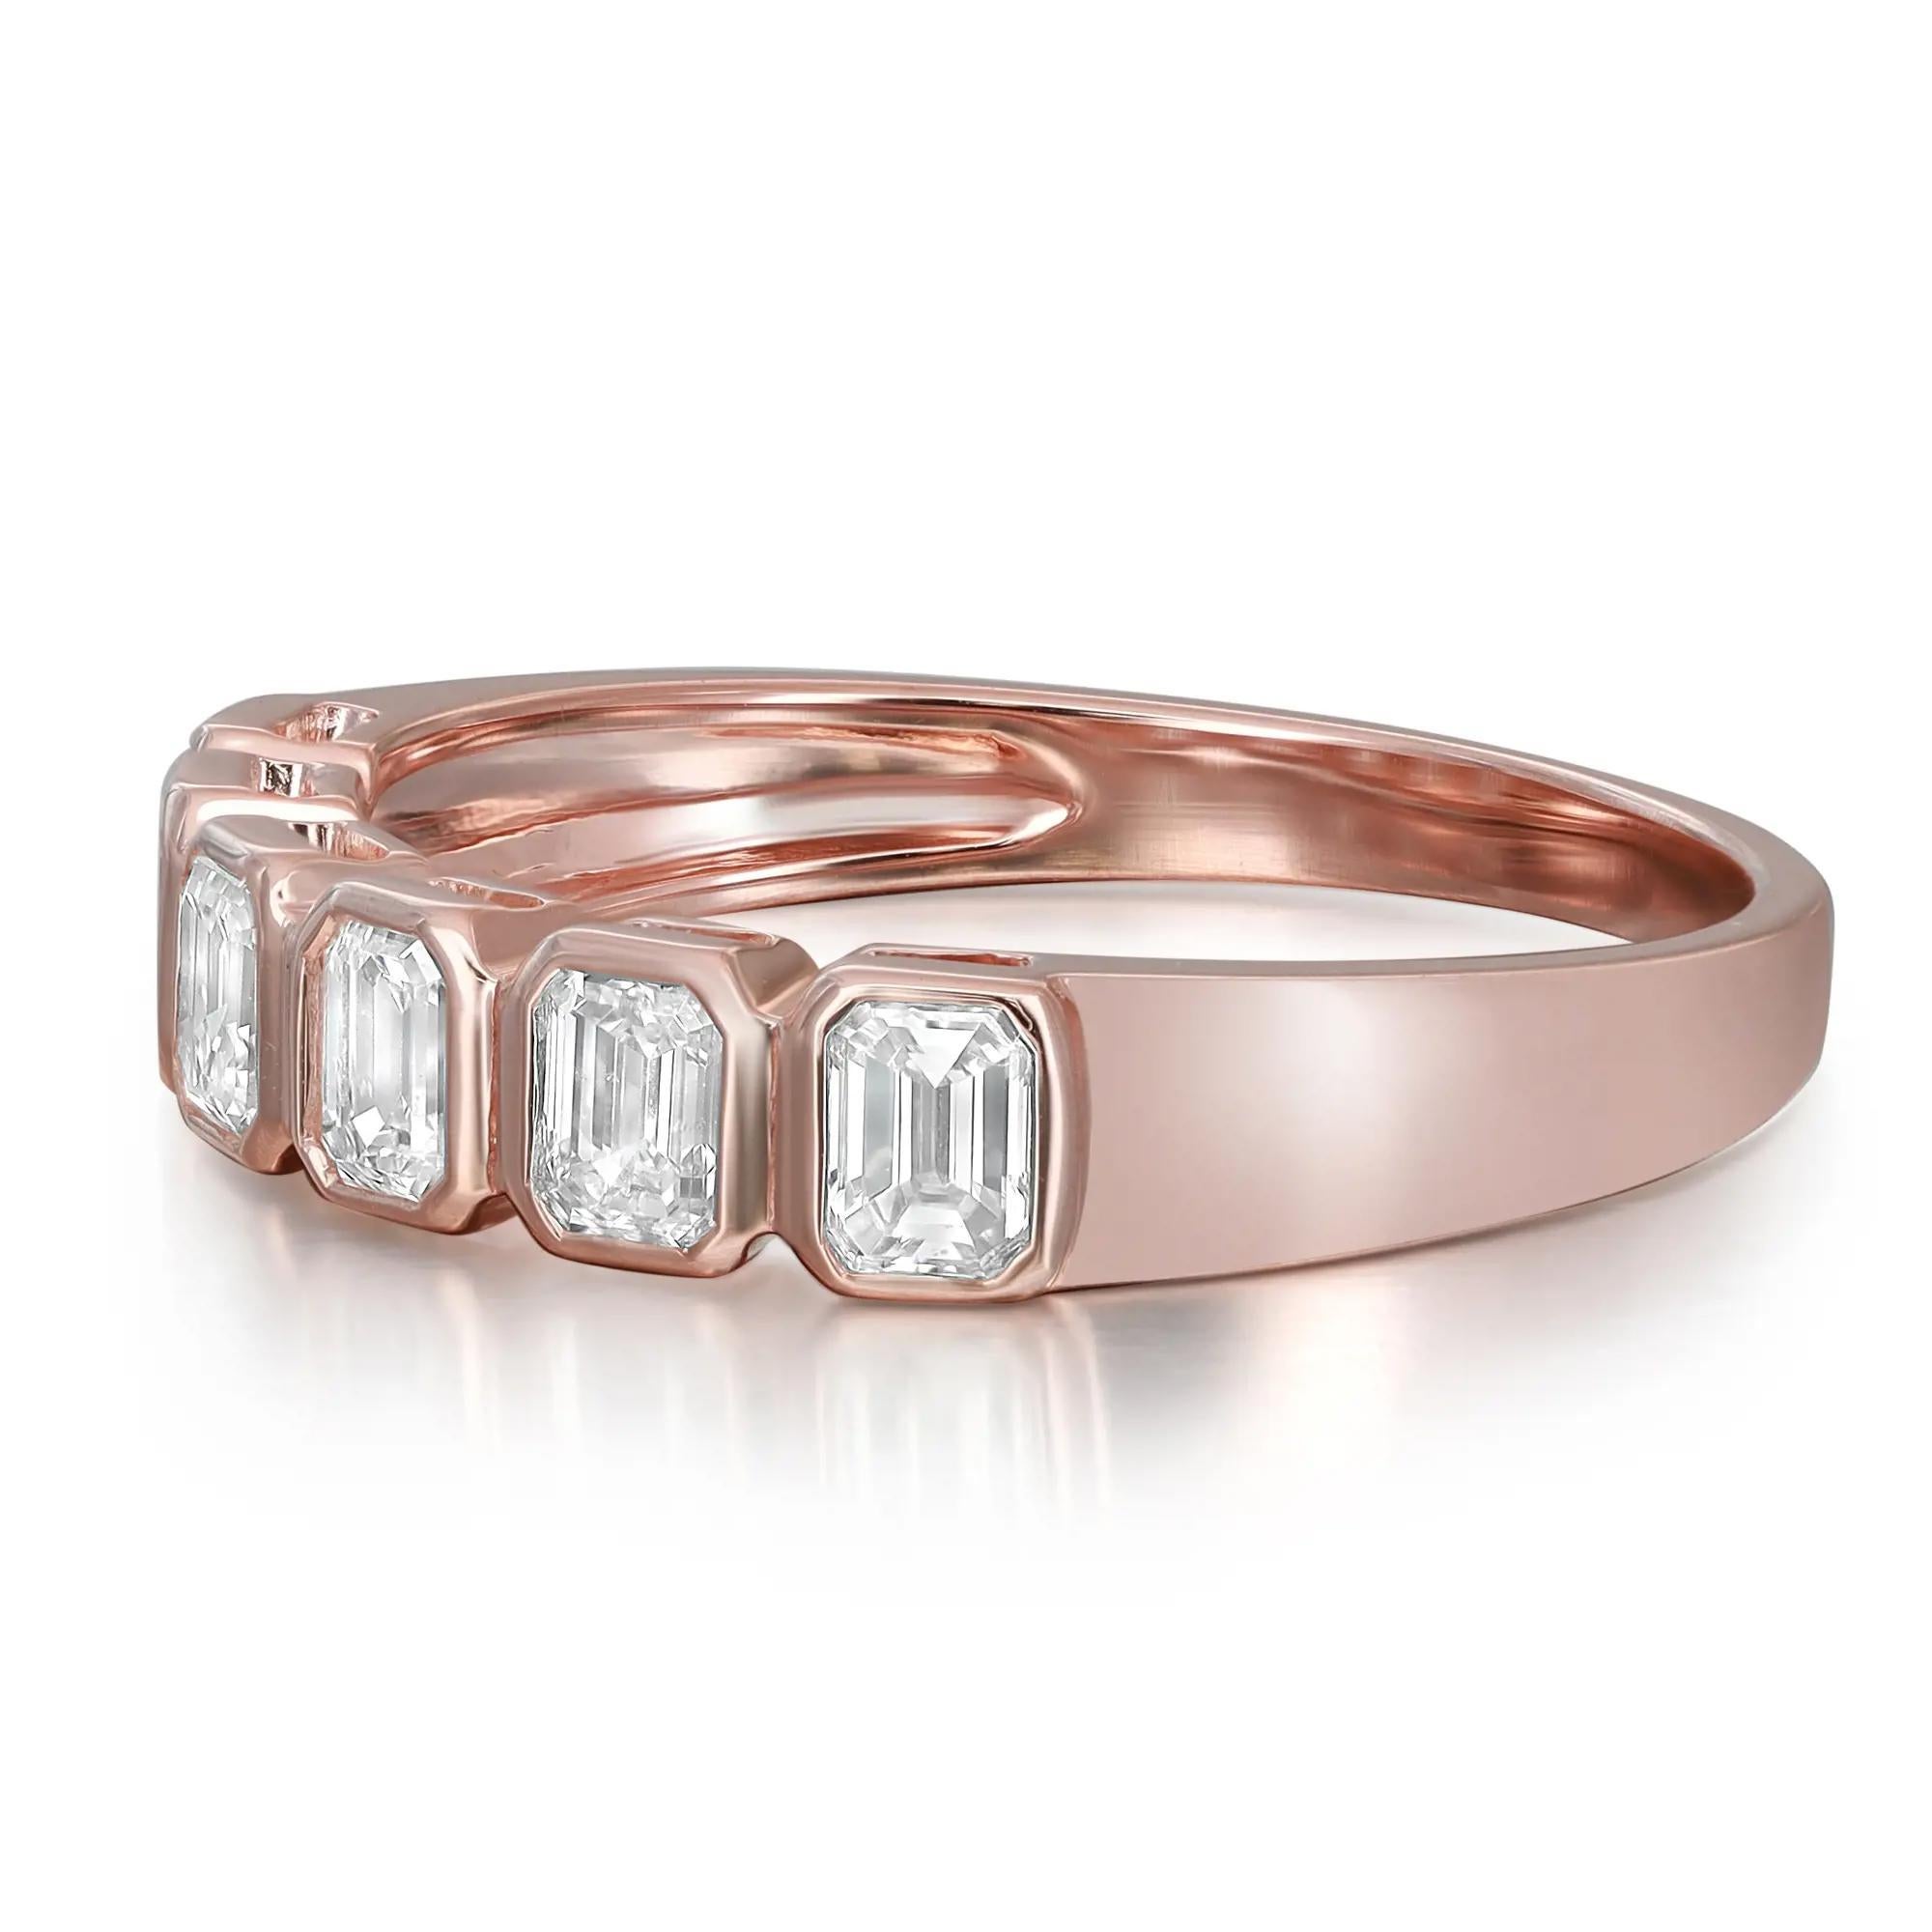 Celebrate everlasting love with this enchanting eternity band ring. Crafted in high polished 18K rose gold. Showcasing 6 bezel set emerald cut dazzling diamonds weighing 0.90 carat. Diamond quality: color G-H and clarity VS-SI. Ring size: 6.5.